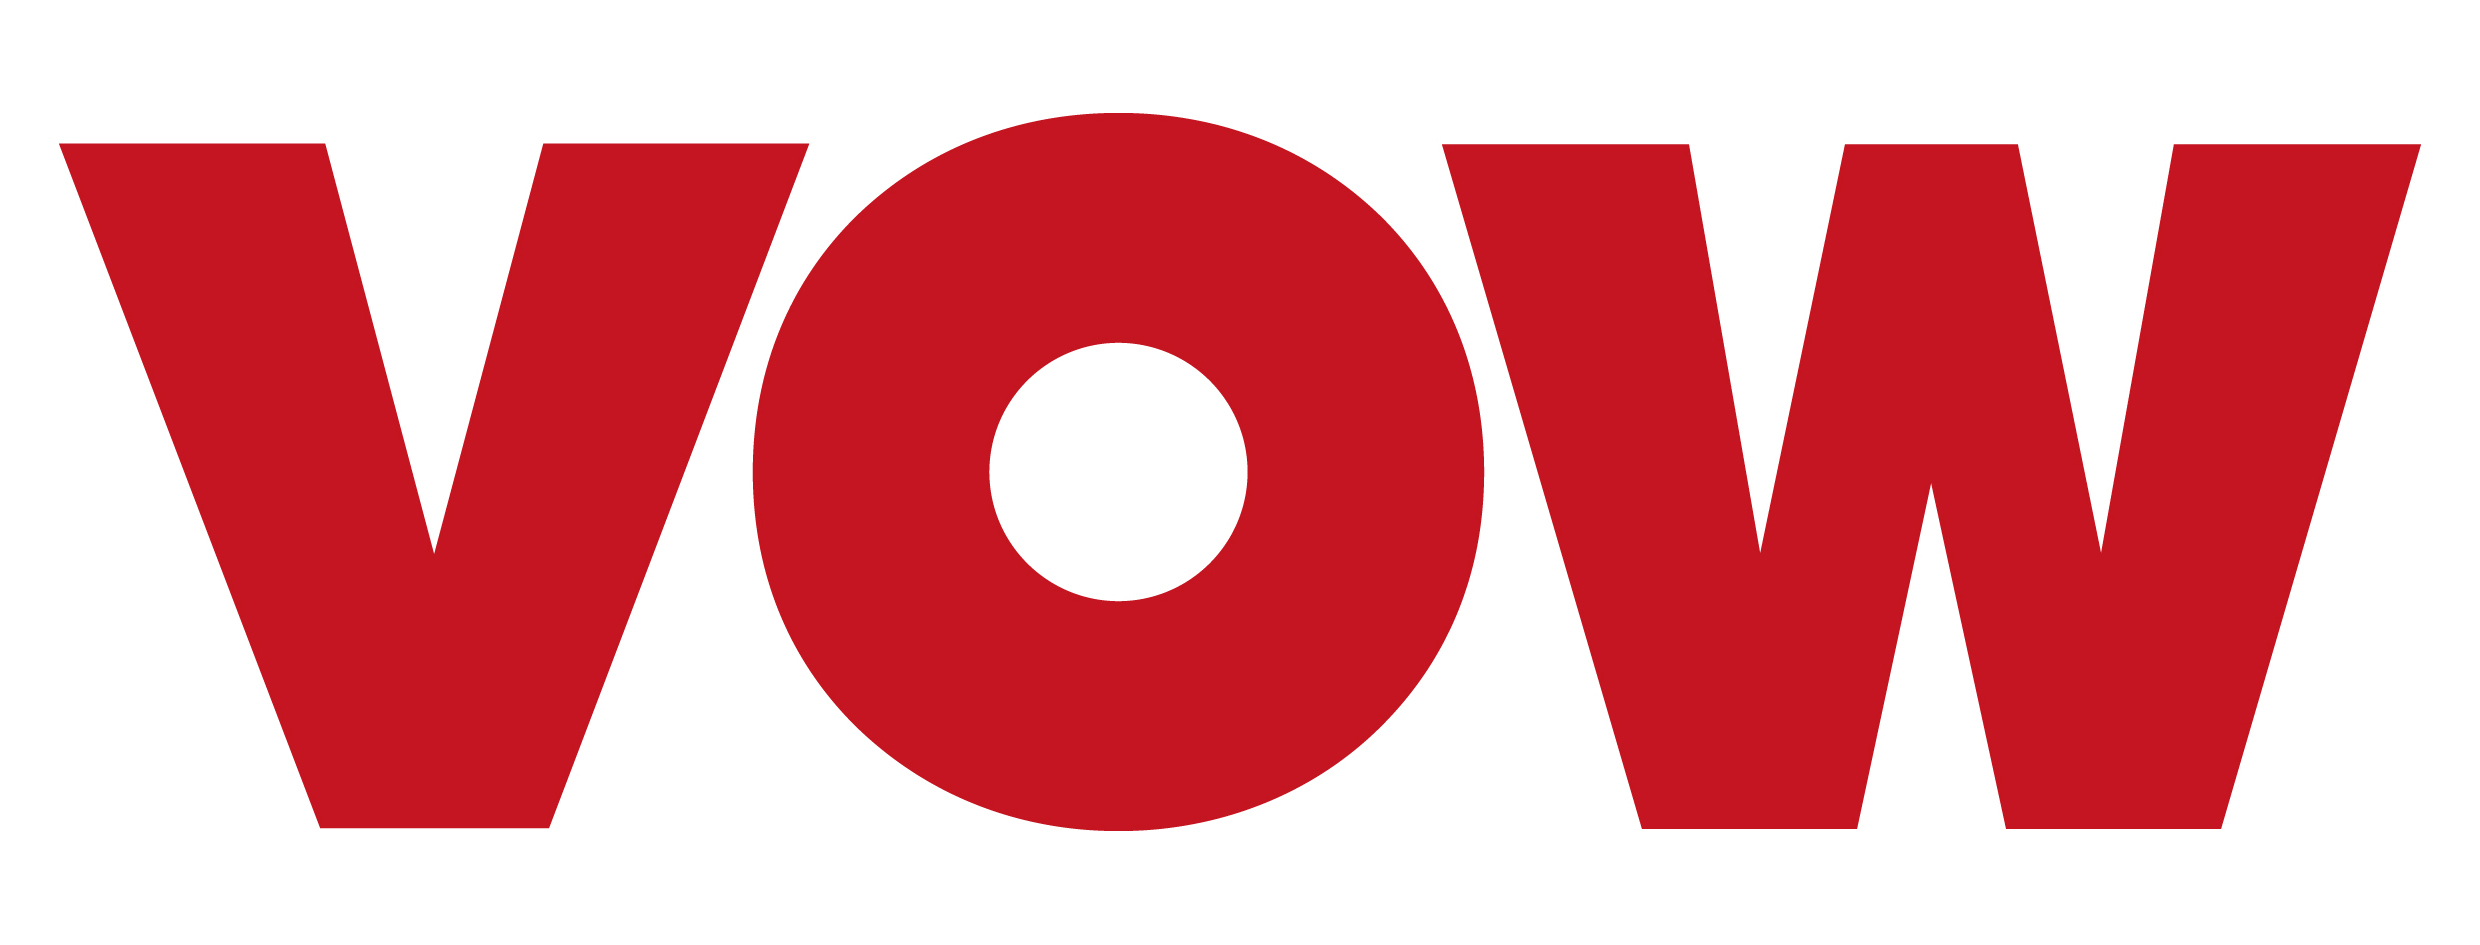 VOW Europe limited logo